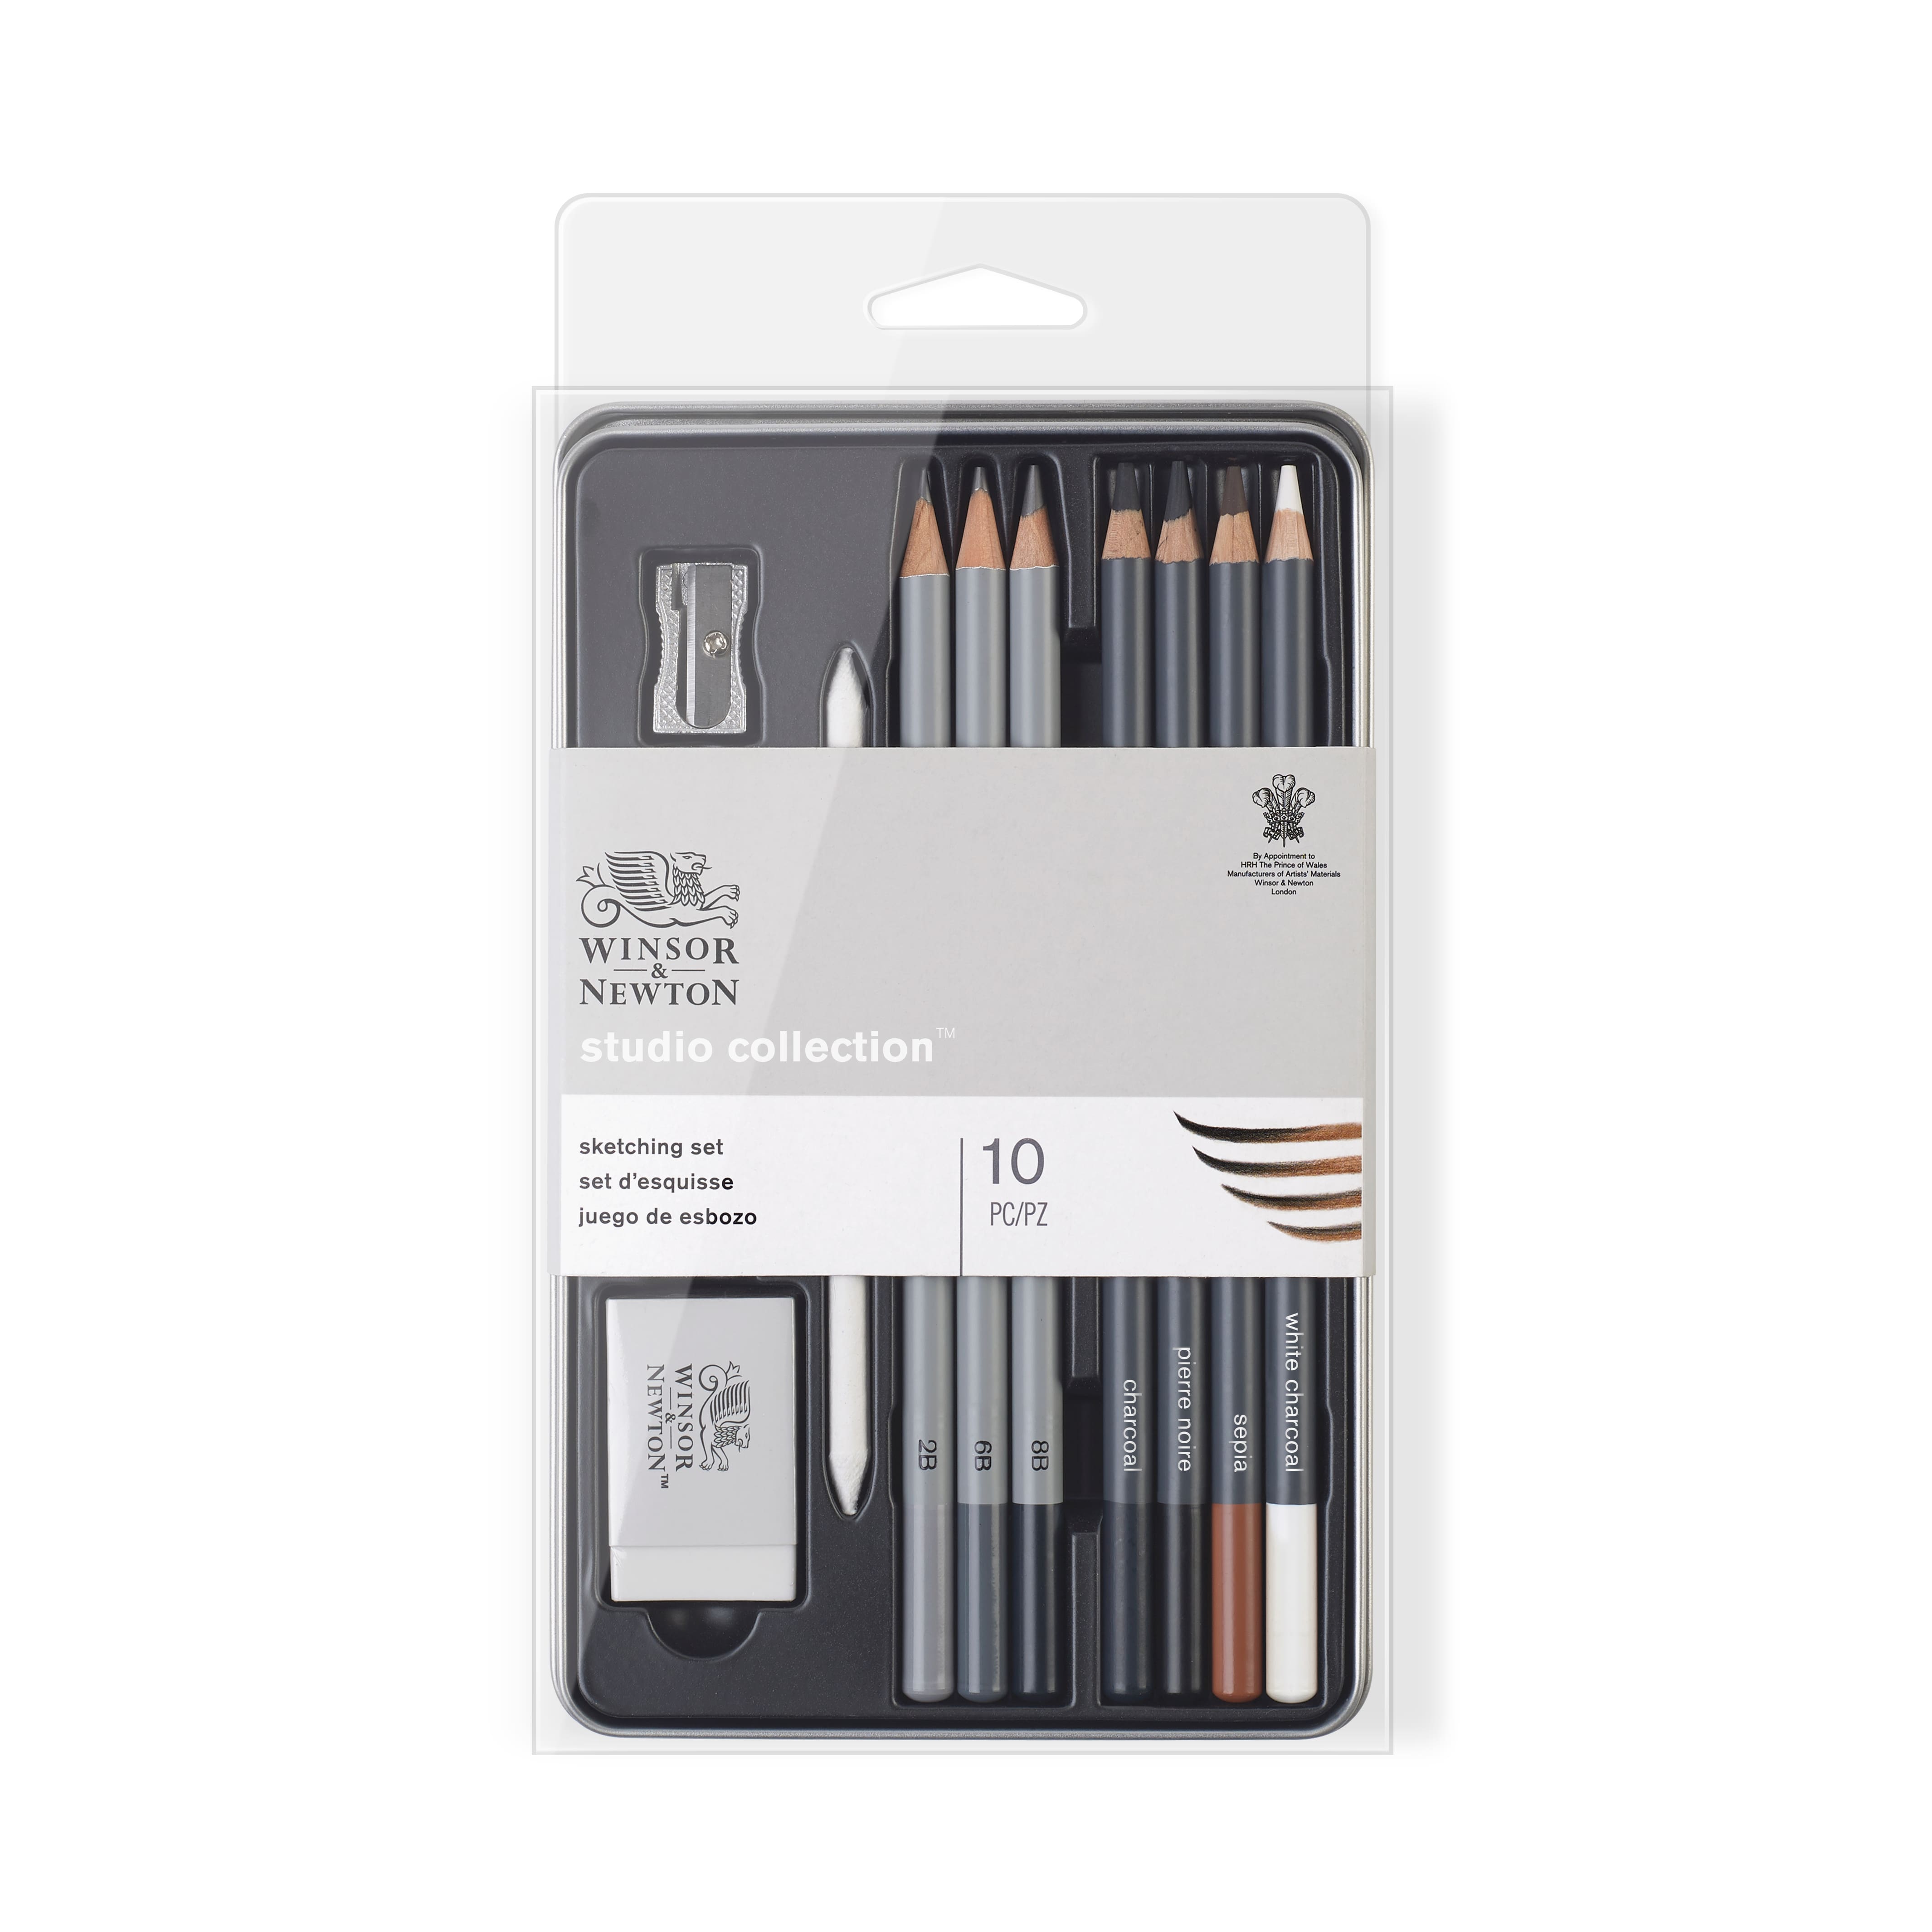 Buy Wynhard HB Pencil Set for Sketching Pencil Drawing Pencils Sketch  Pencils Set Shading Graphite Pencils HB Pencils for Writing Pencil Kit Art  Supplies Schools Offices Home Graphite Pencil Set 50 Pcs